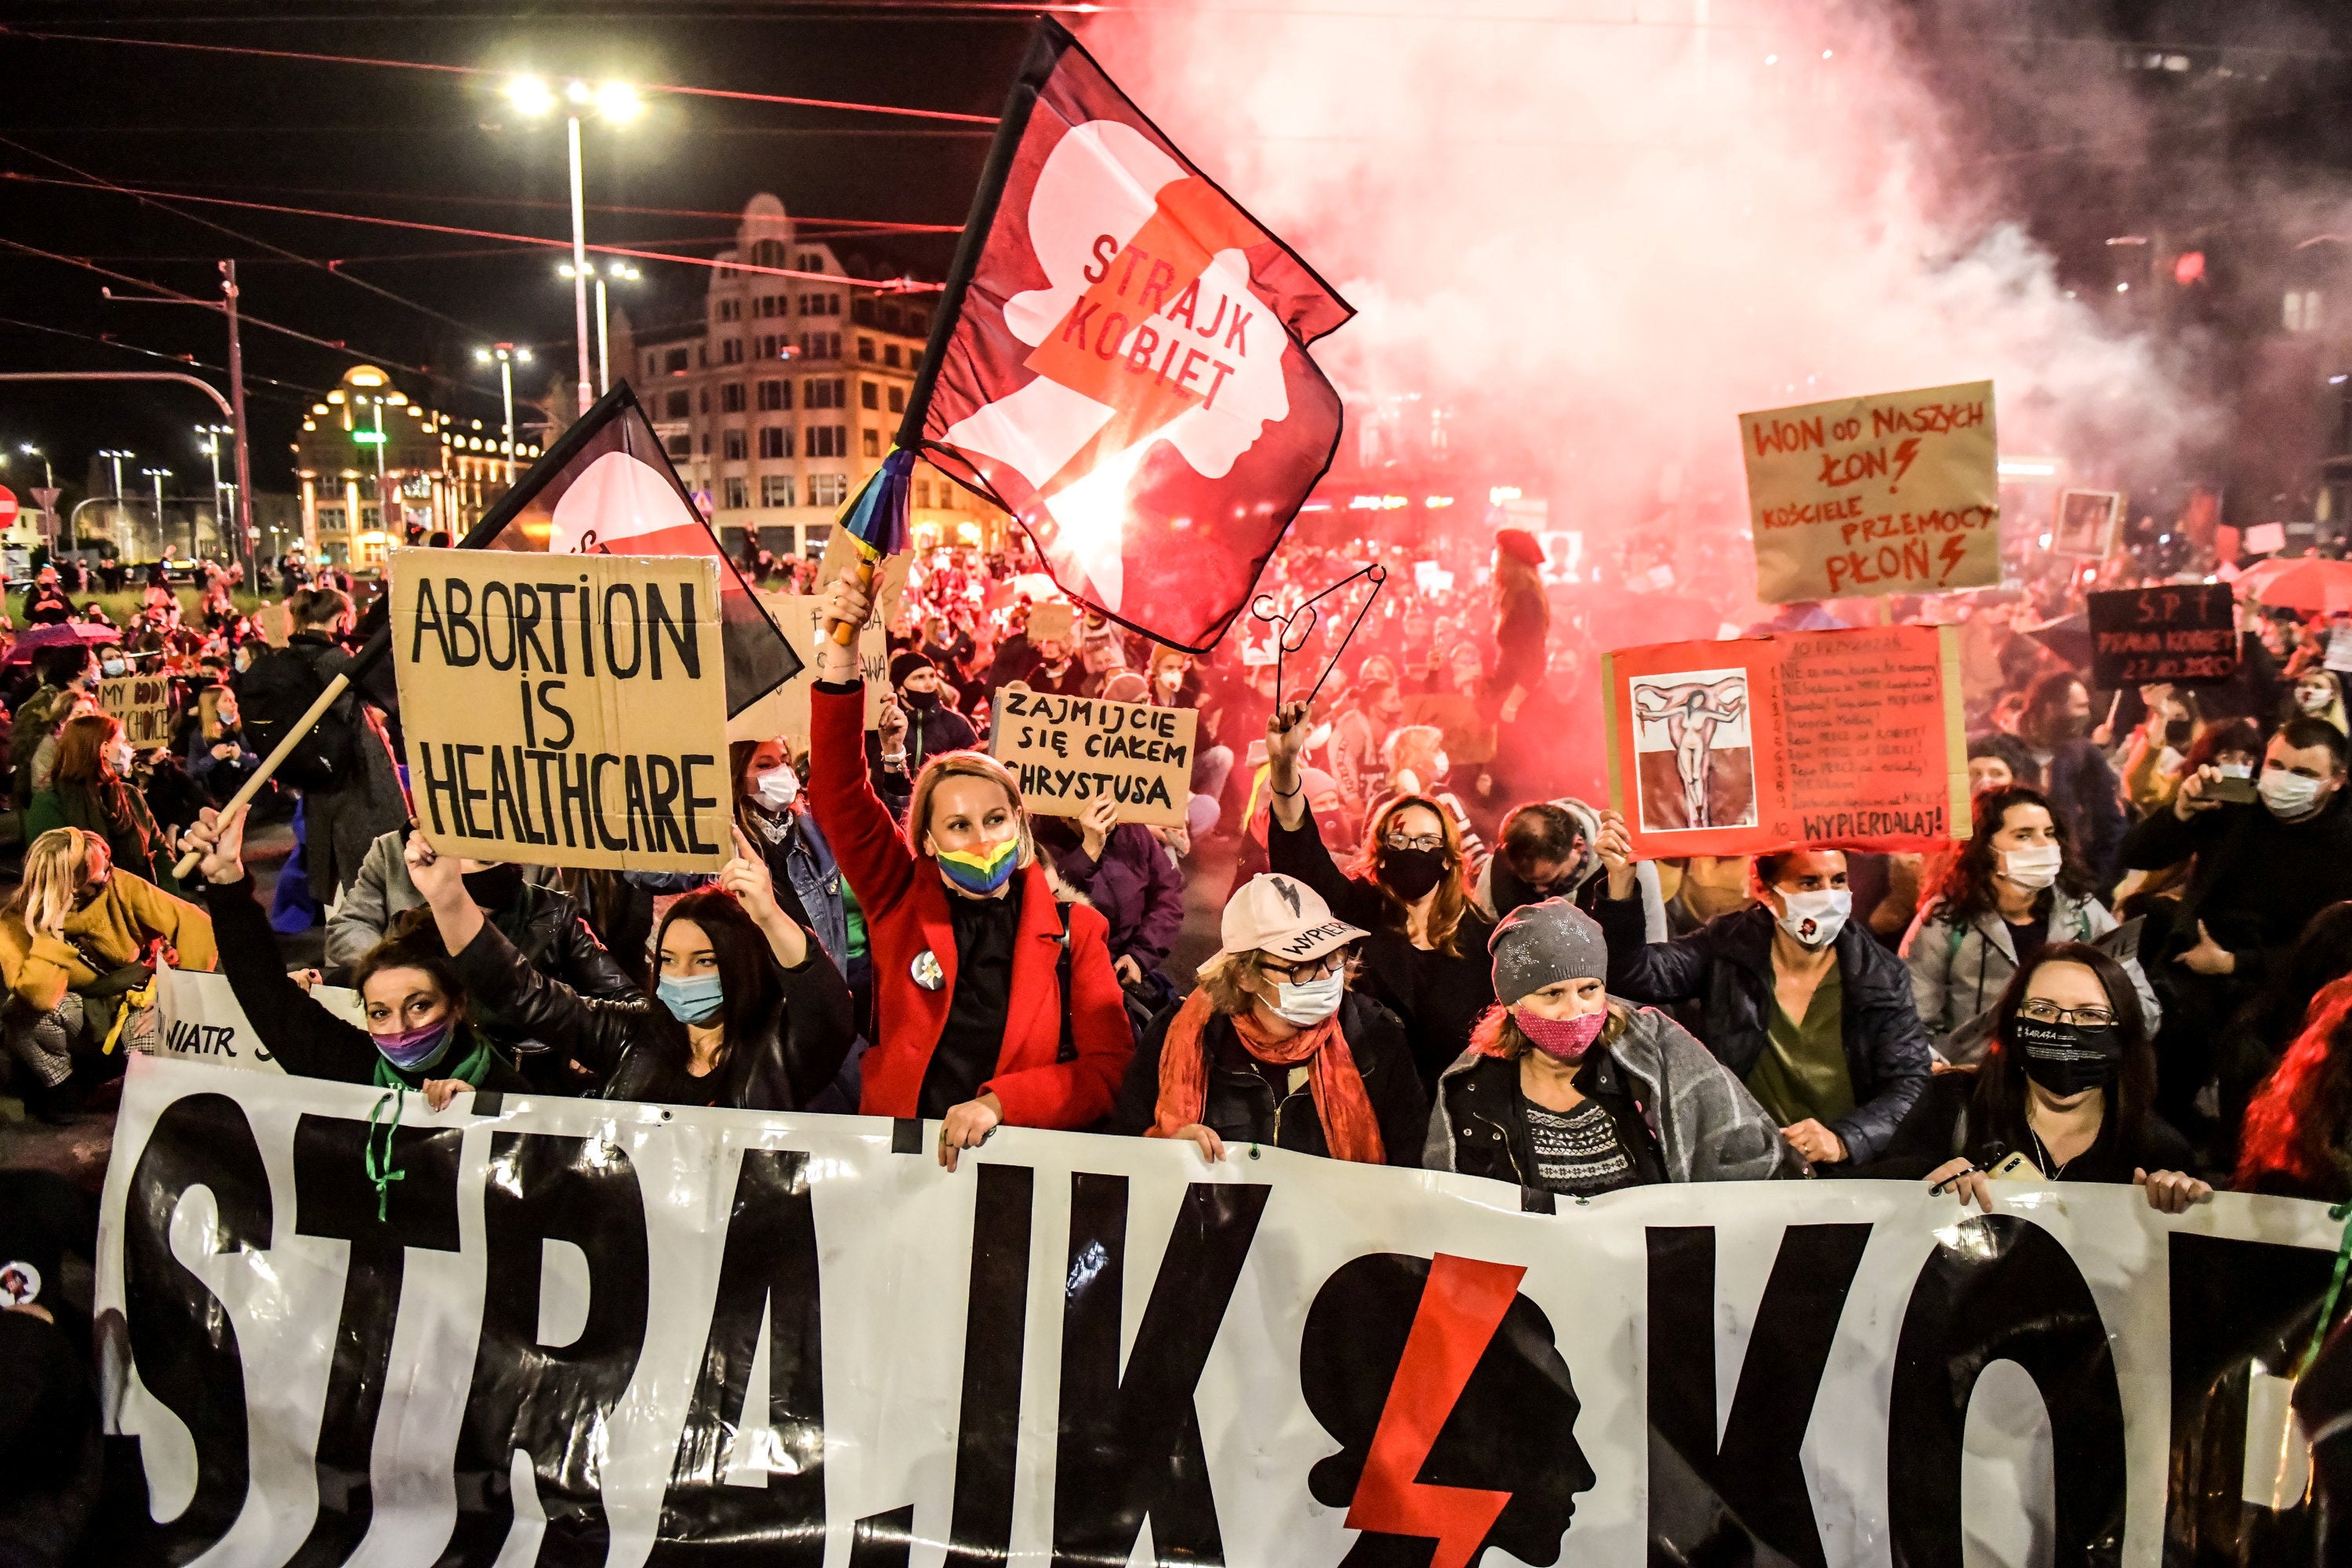 People protest against the ruling by Poland’s constitutional tribunal that imposes a near-total ban on abortion